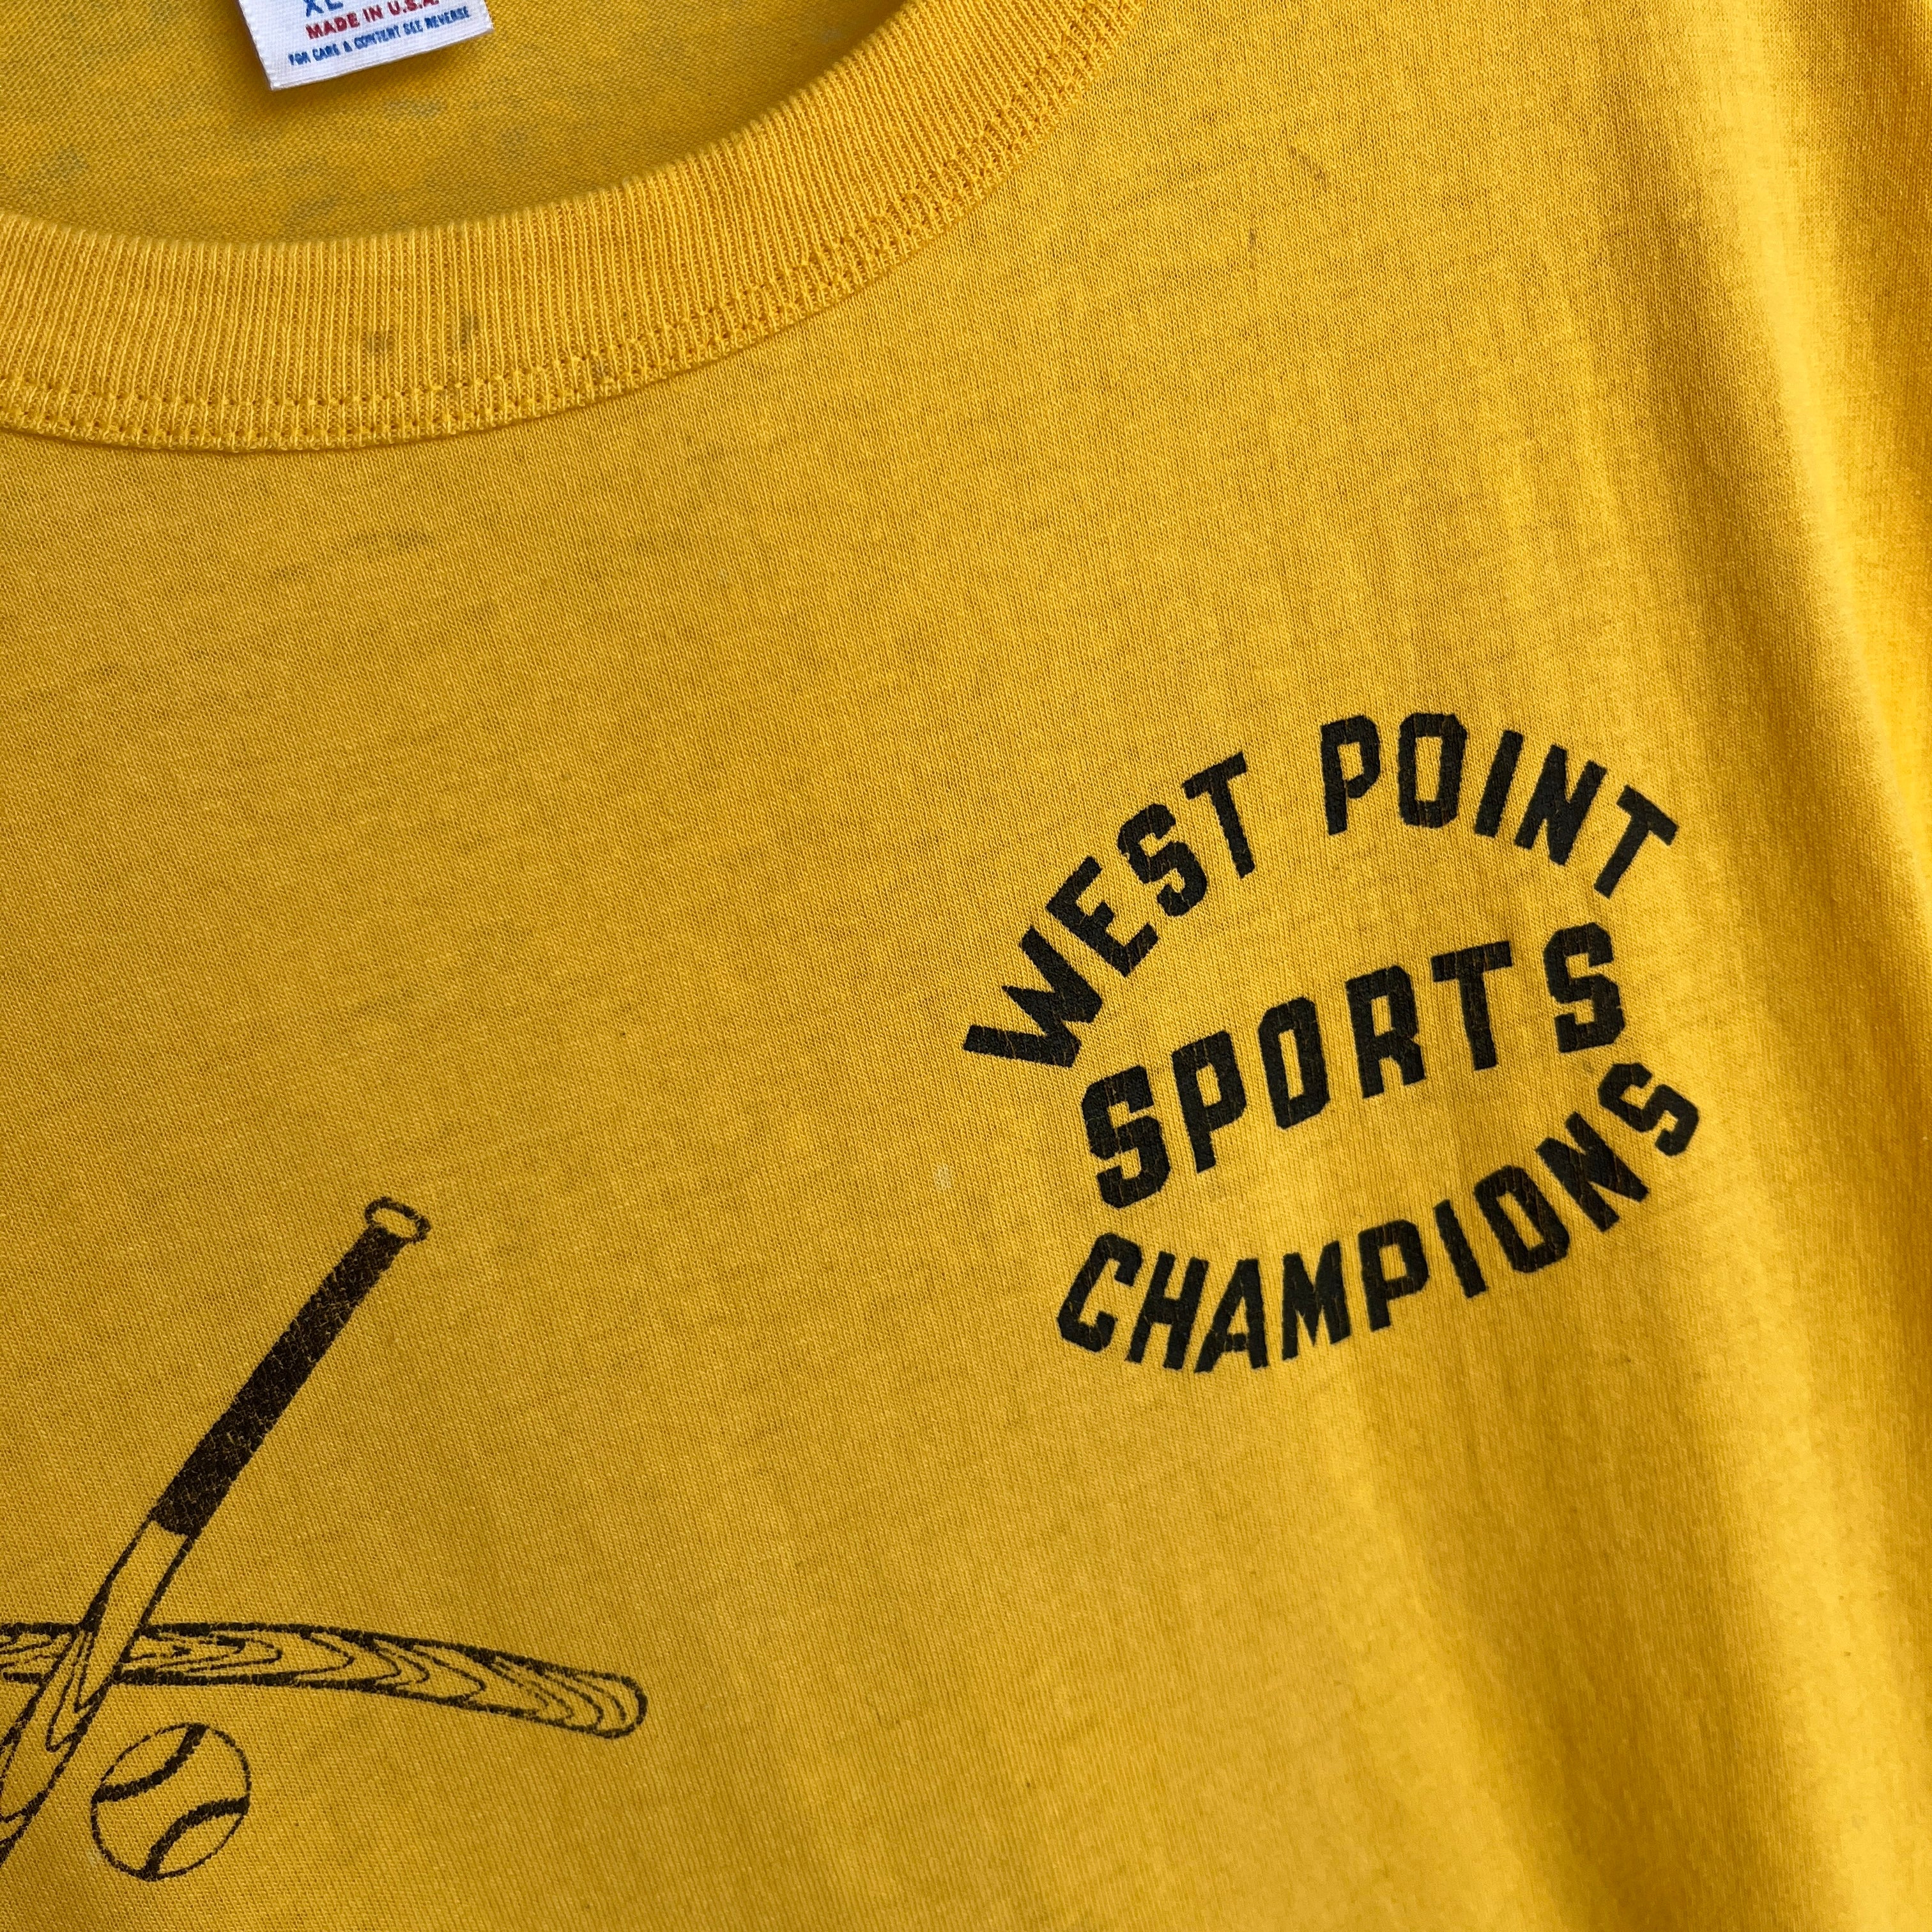 1980/90s West Point Sports Champions Super Stained T-Shirt with a Rolled Neck